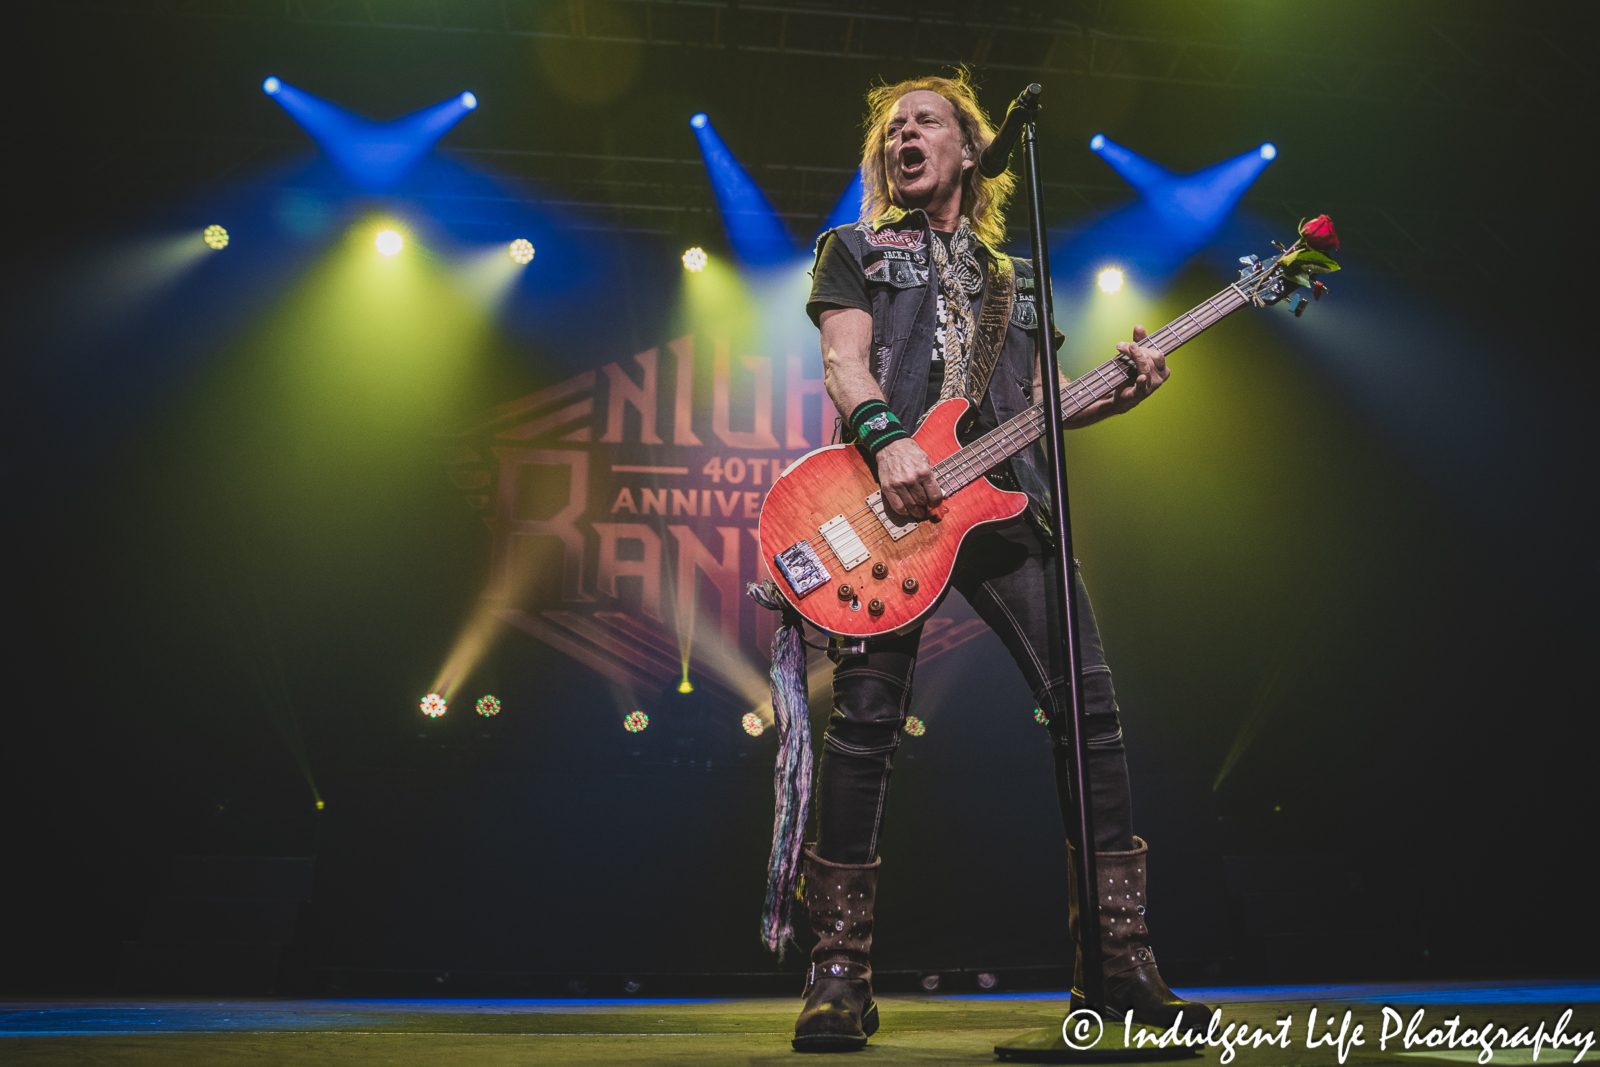 Frontman and bass player Jack Blades of Night Ranger performing live at Ameristar Casino's Star Pavilion in Kansas City, MO on October 20, 2023.